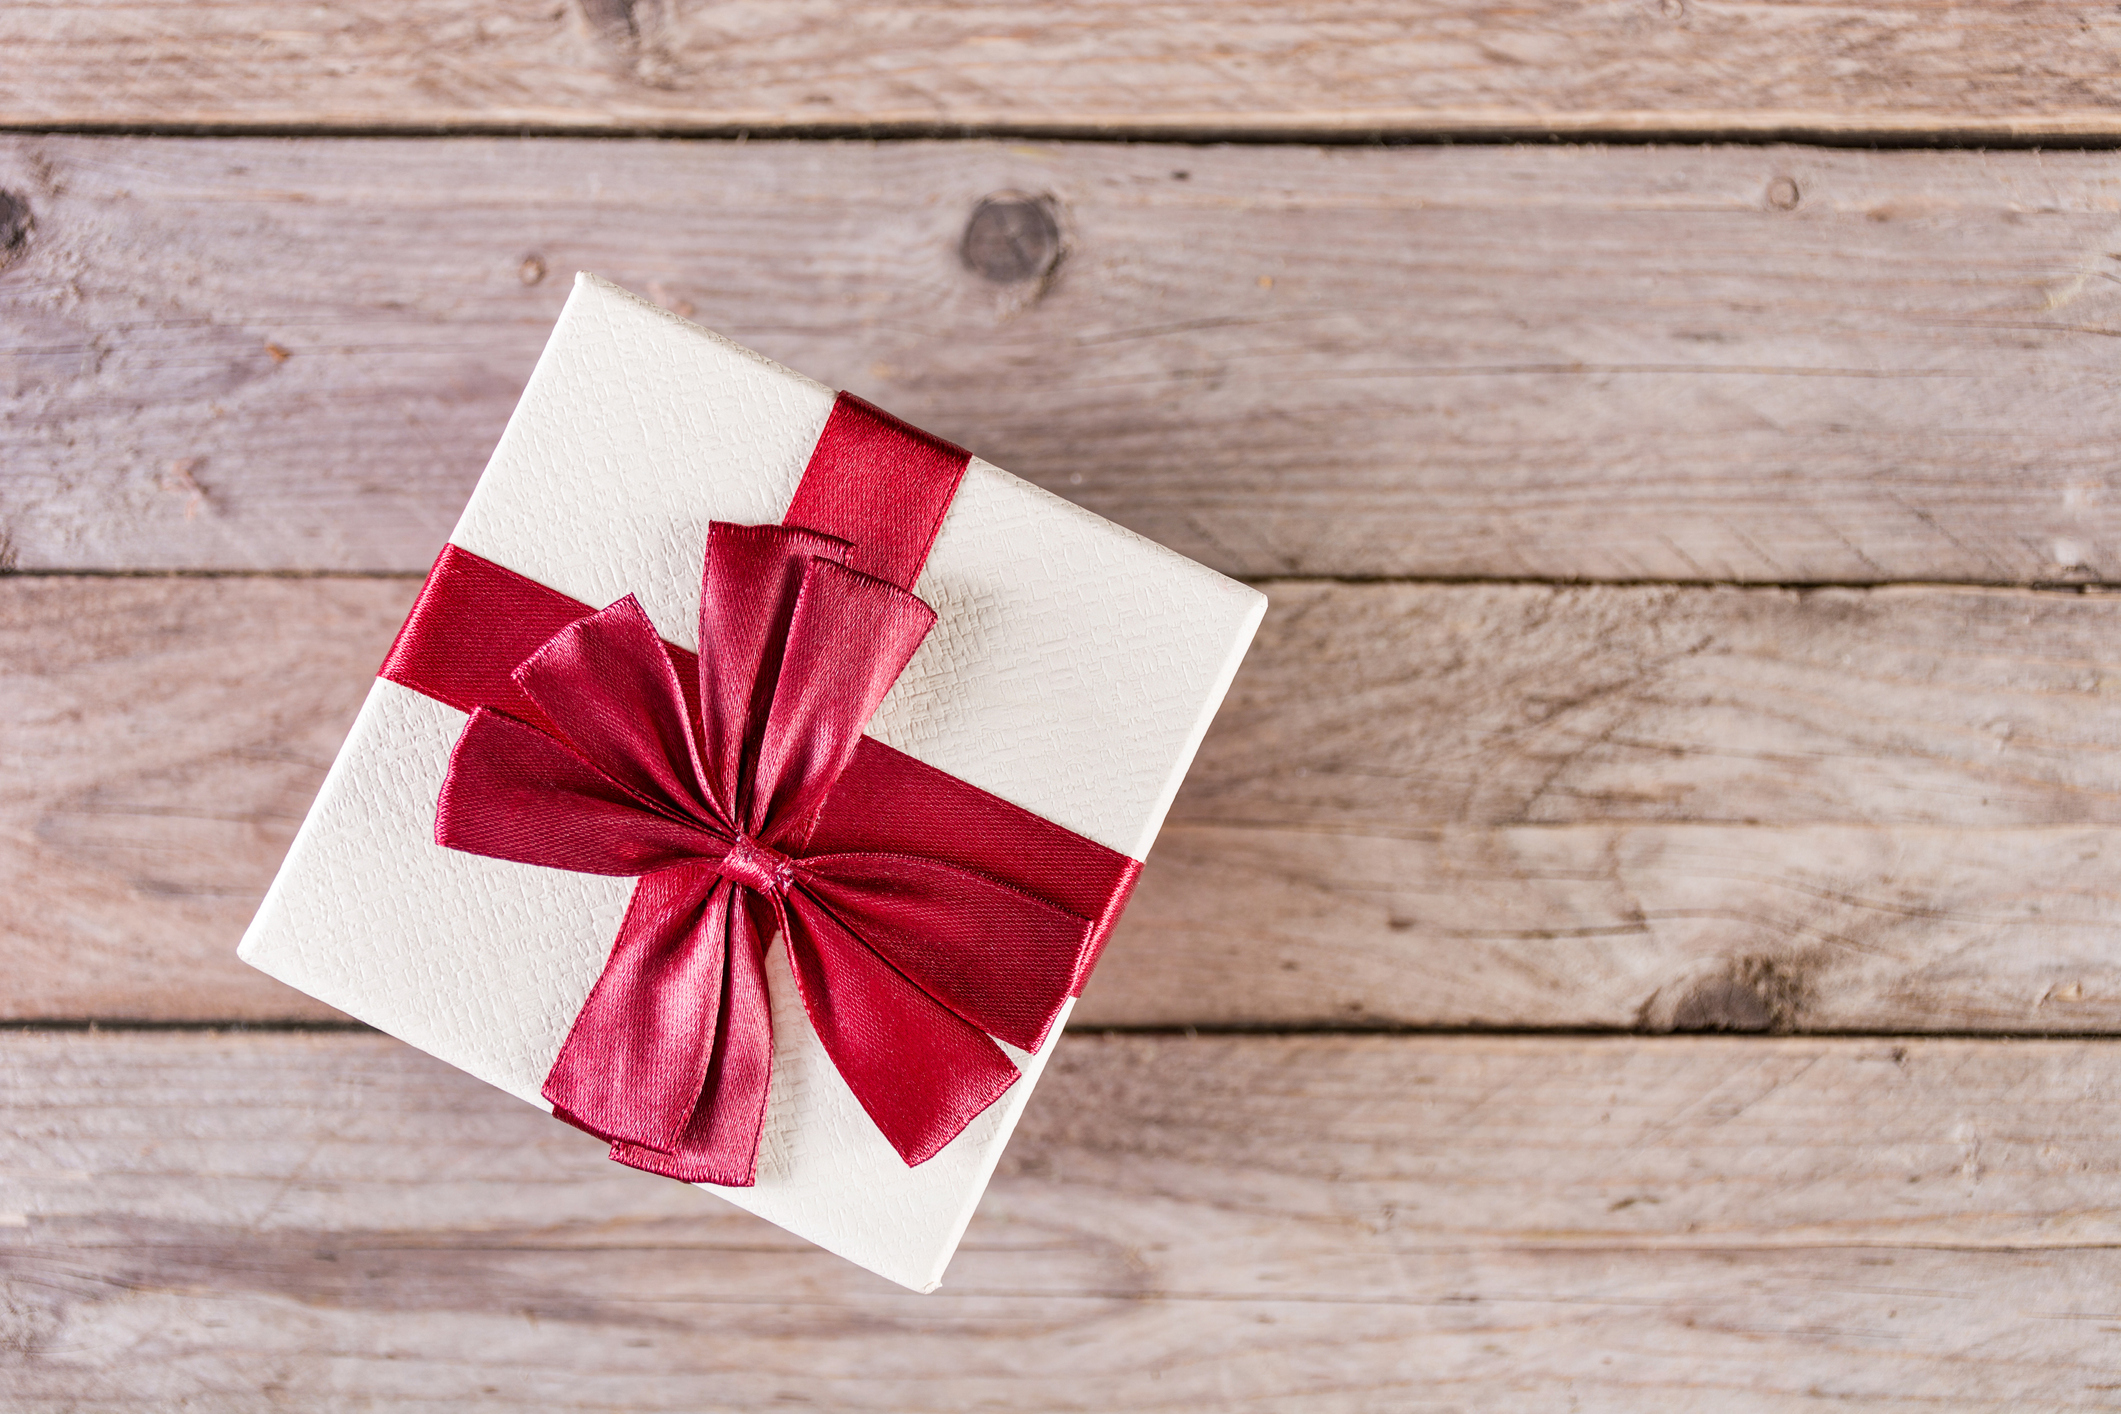 15 Holiday Wish List Must-Haves for Advanced Practitioners